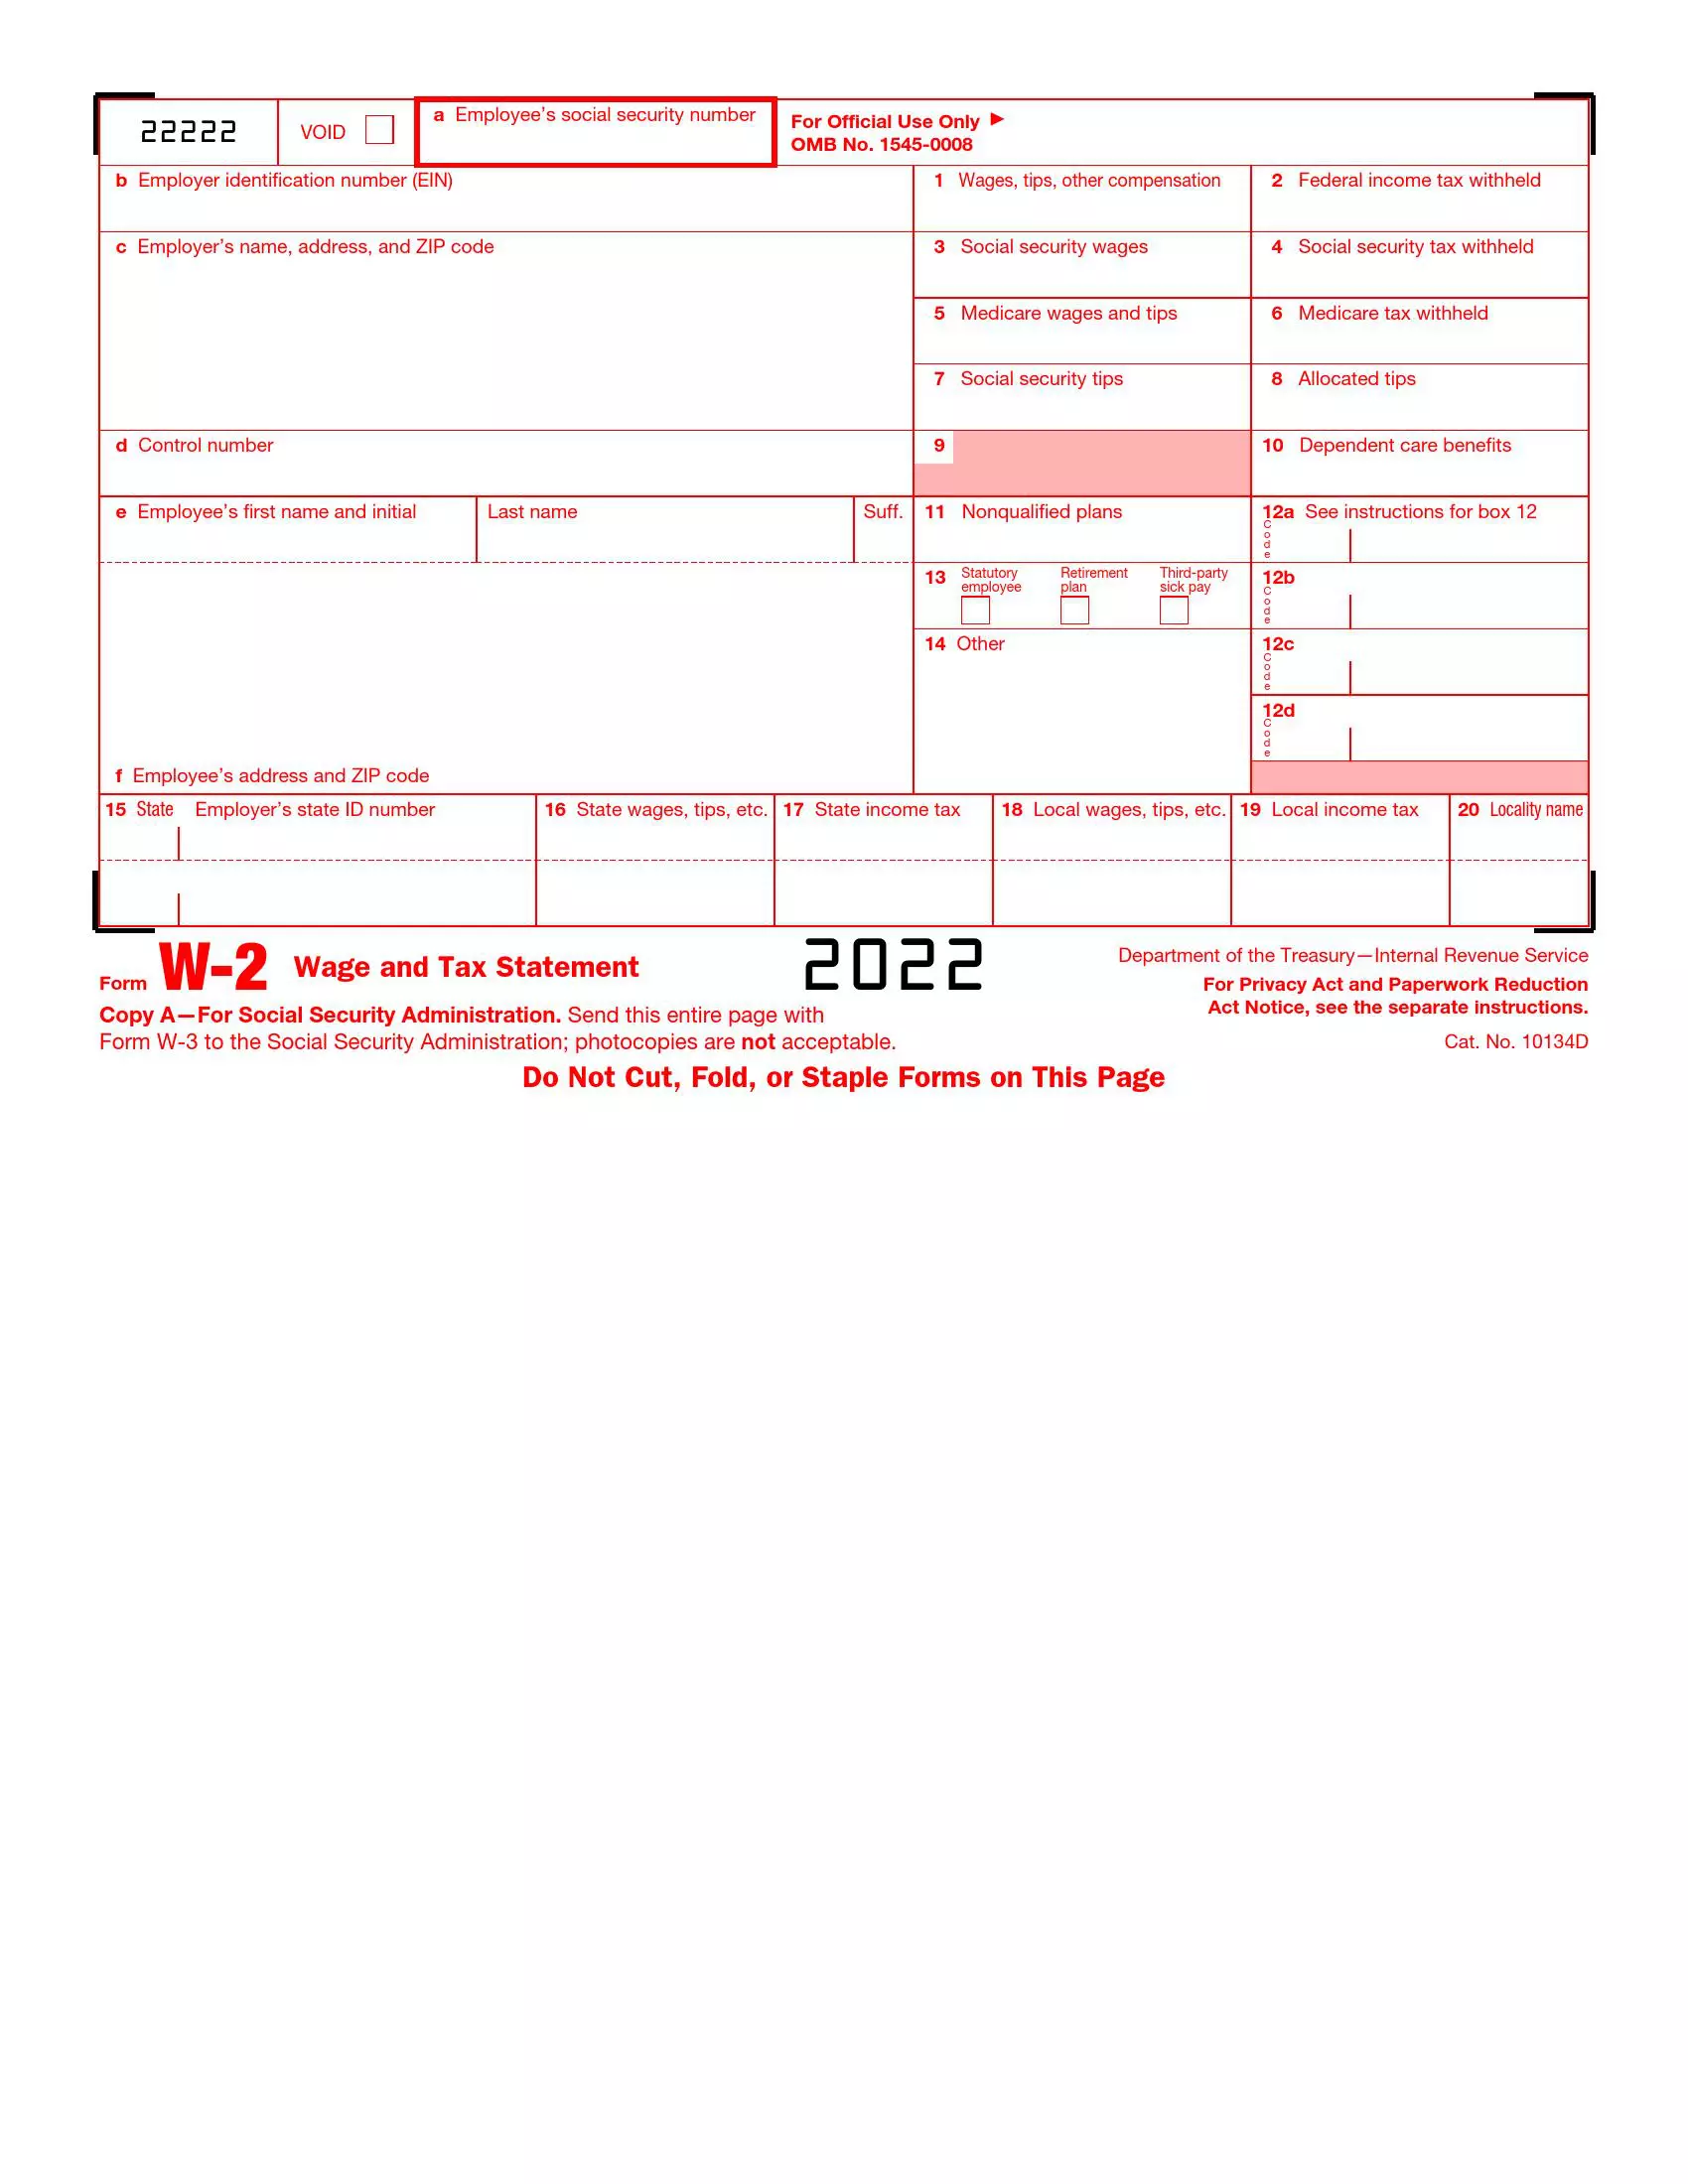 irs form w-2 2022 preview